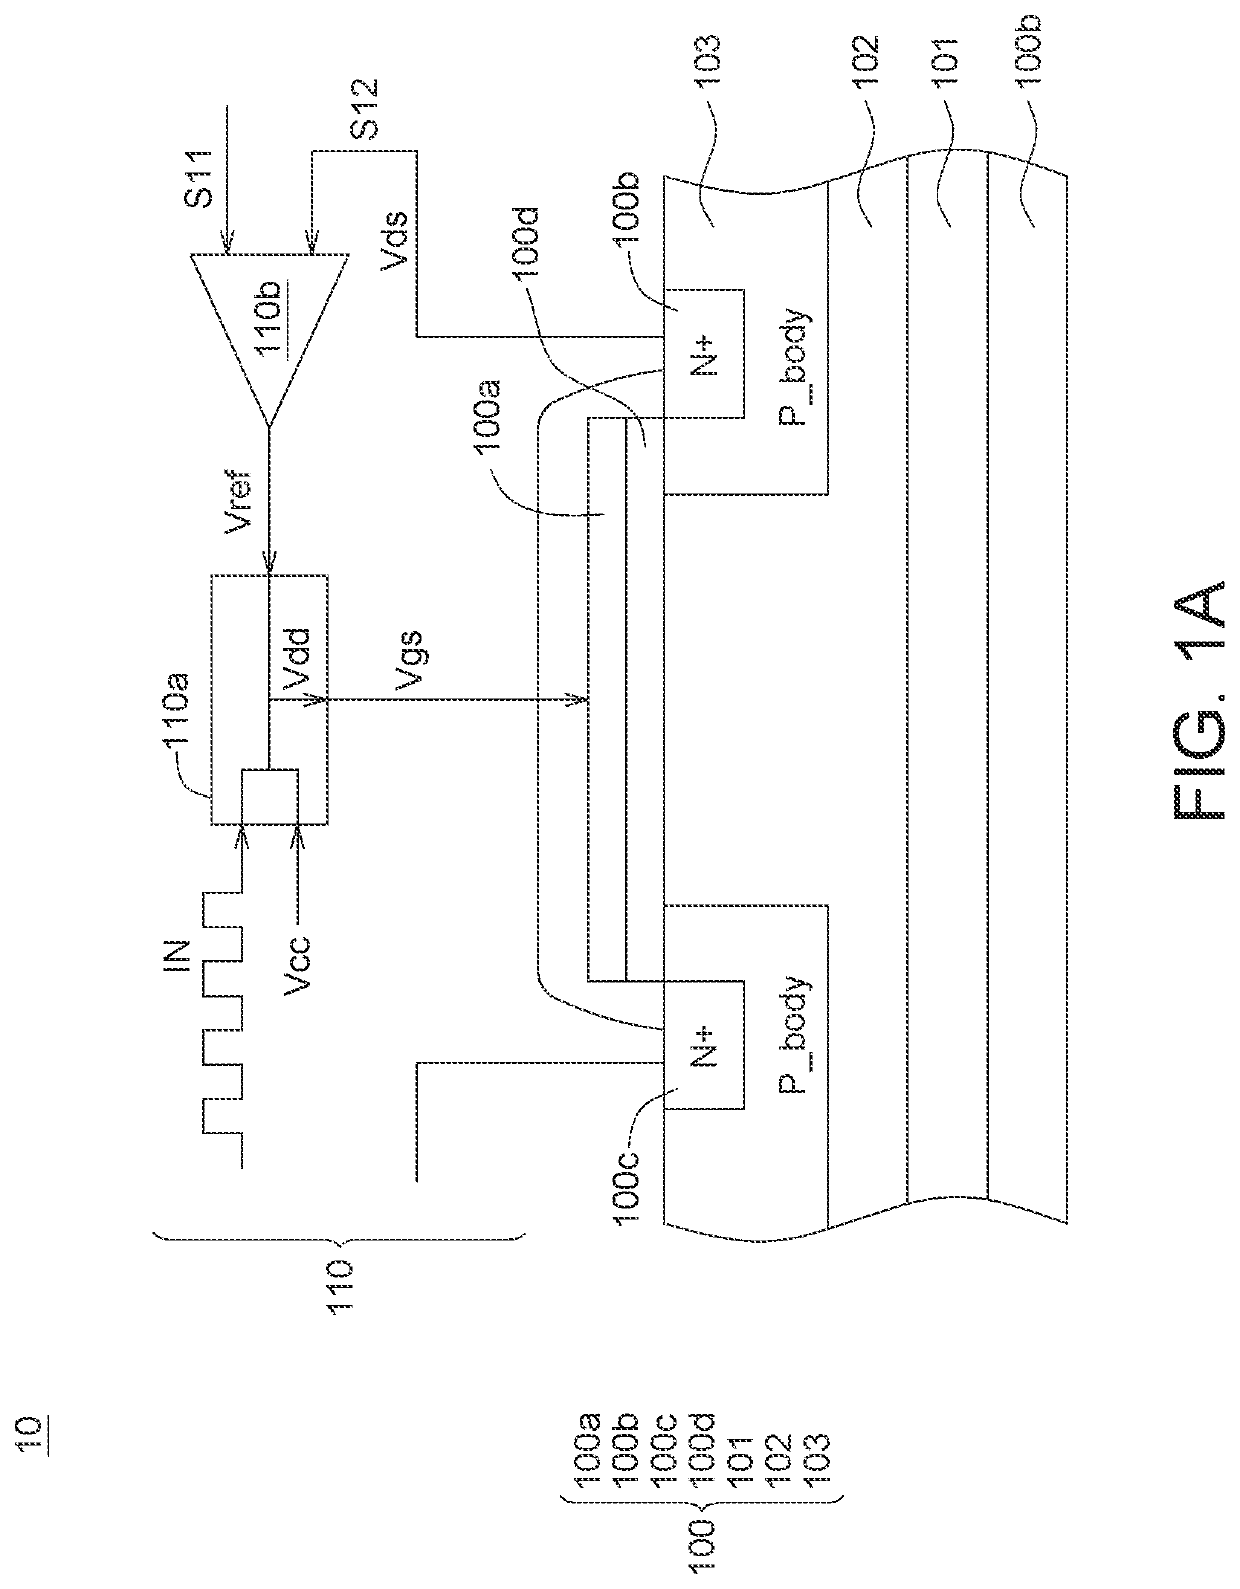 Power transistor module and controlling method thereof